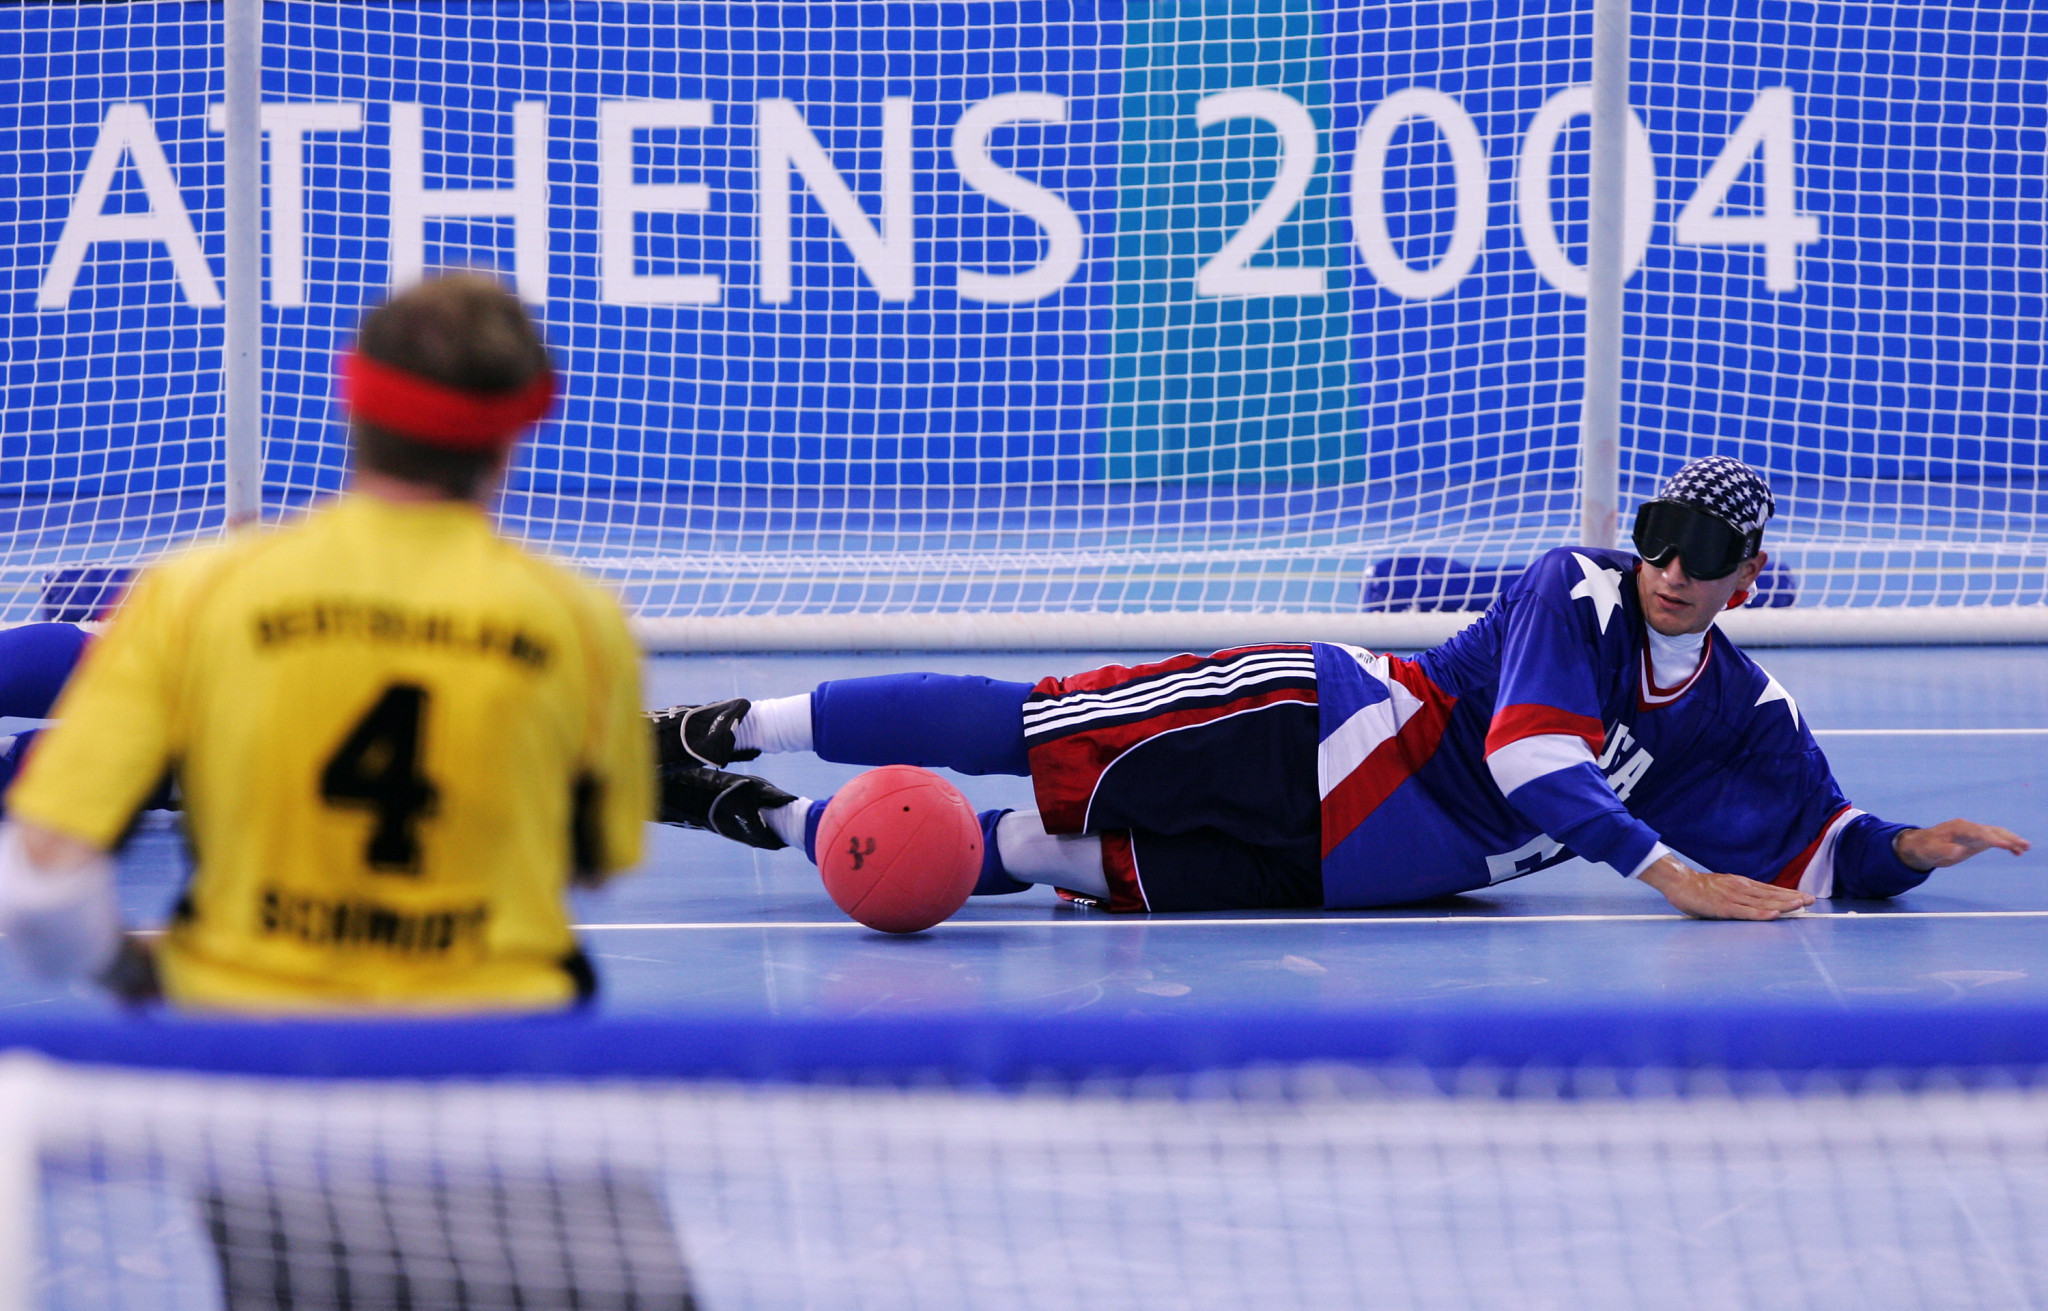 Tyler Merren has won two Paralympic medals in goalball ©Getty Images